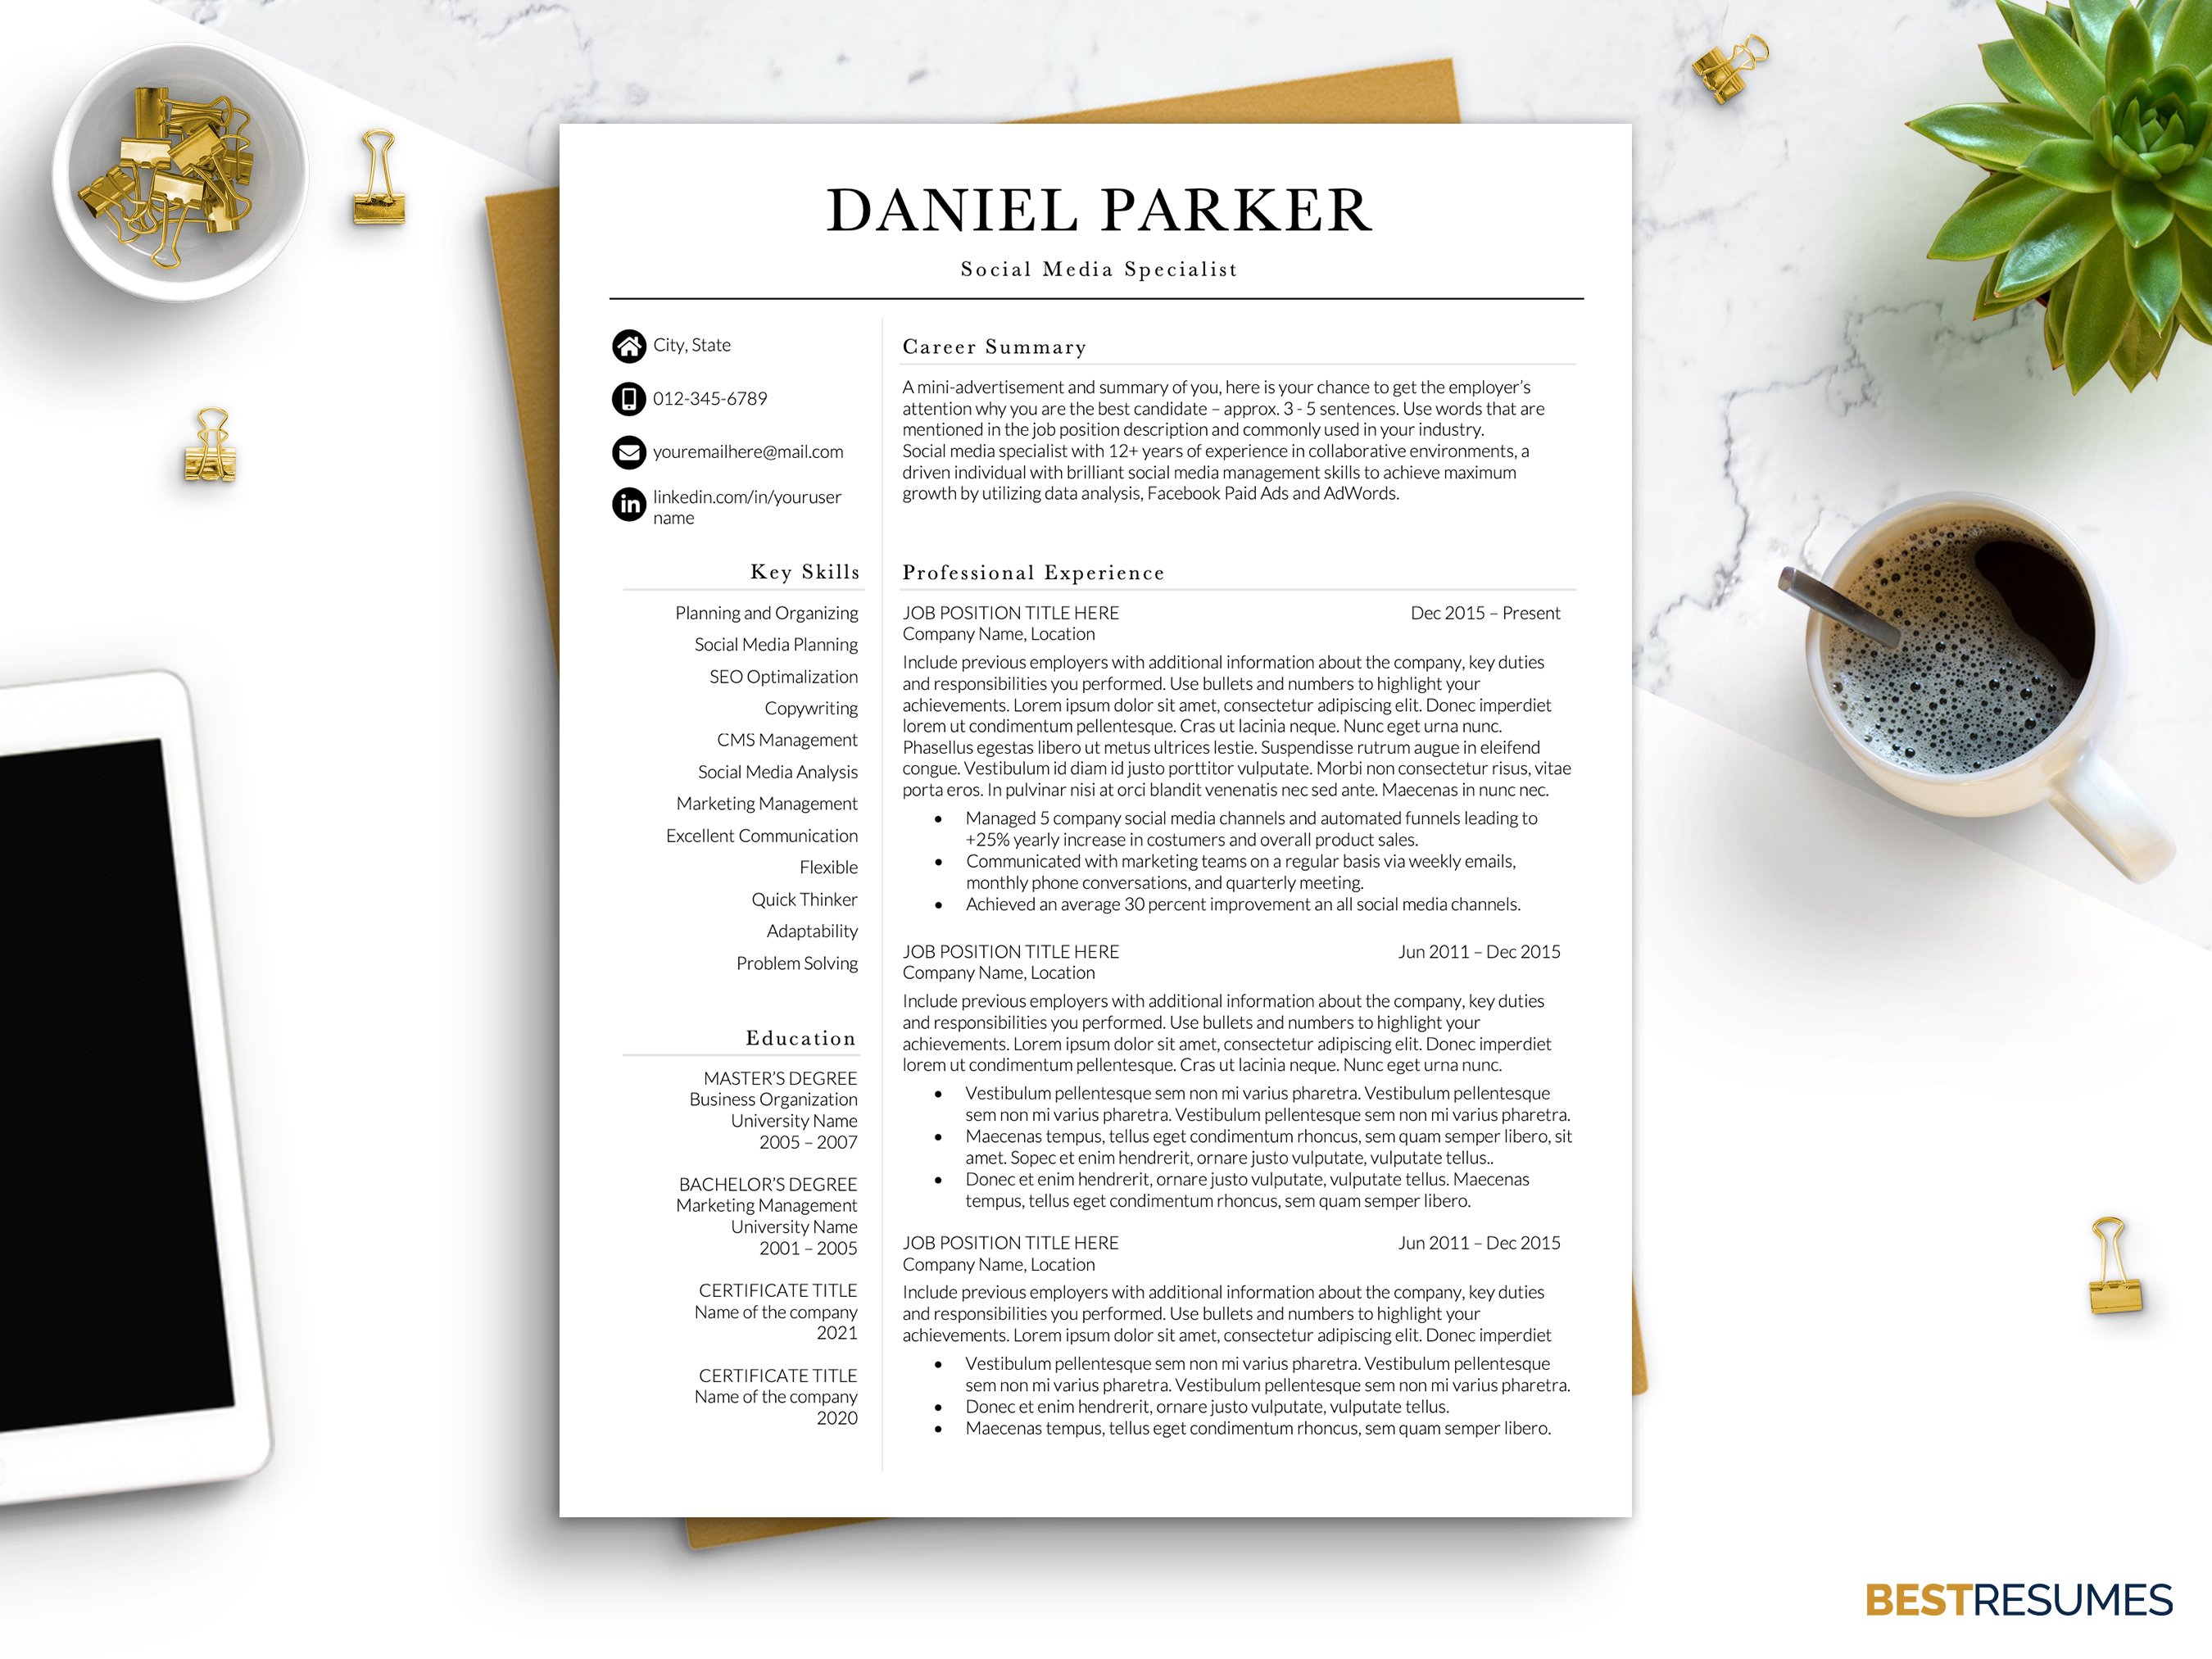 Executive CV/Resume Template Word cover image.